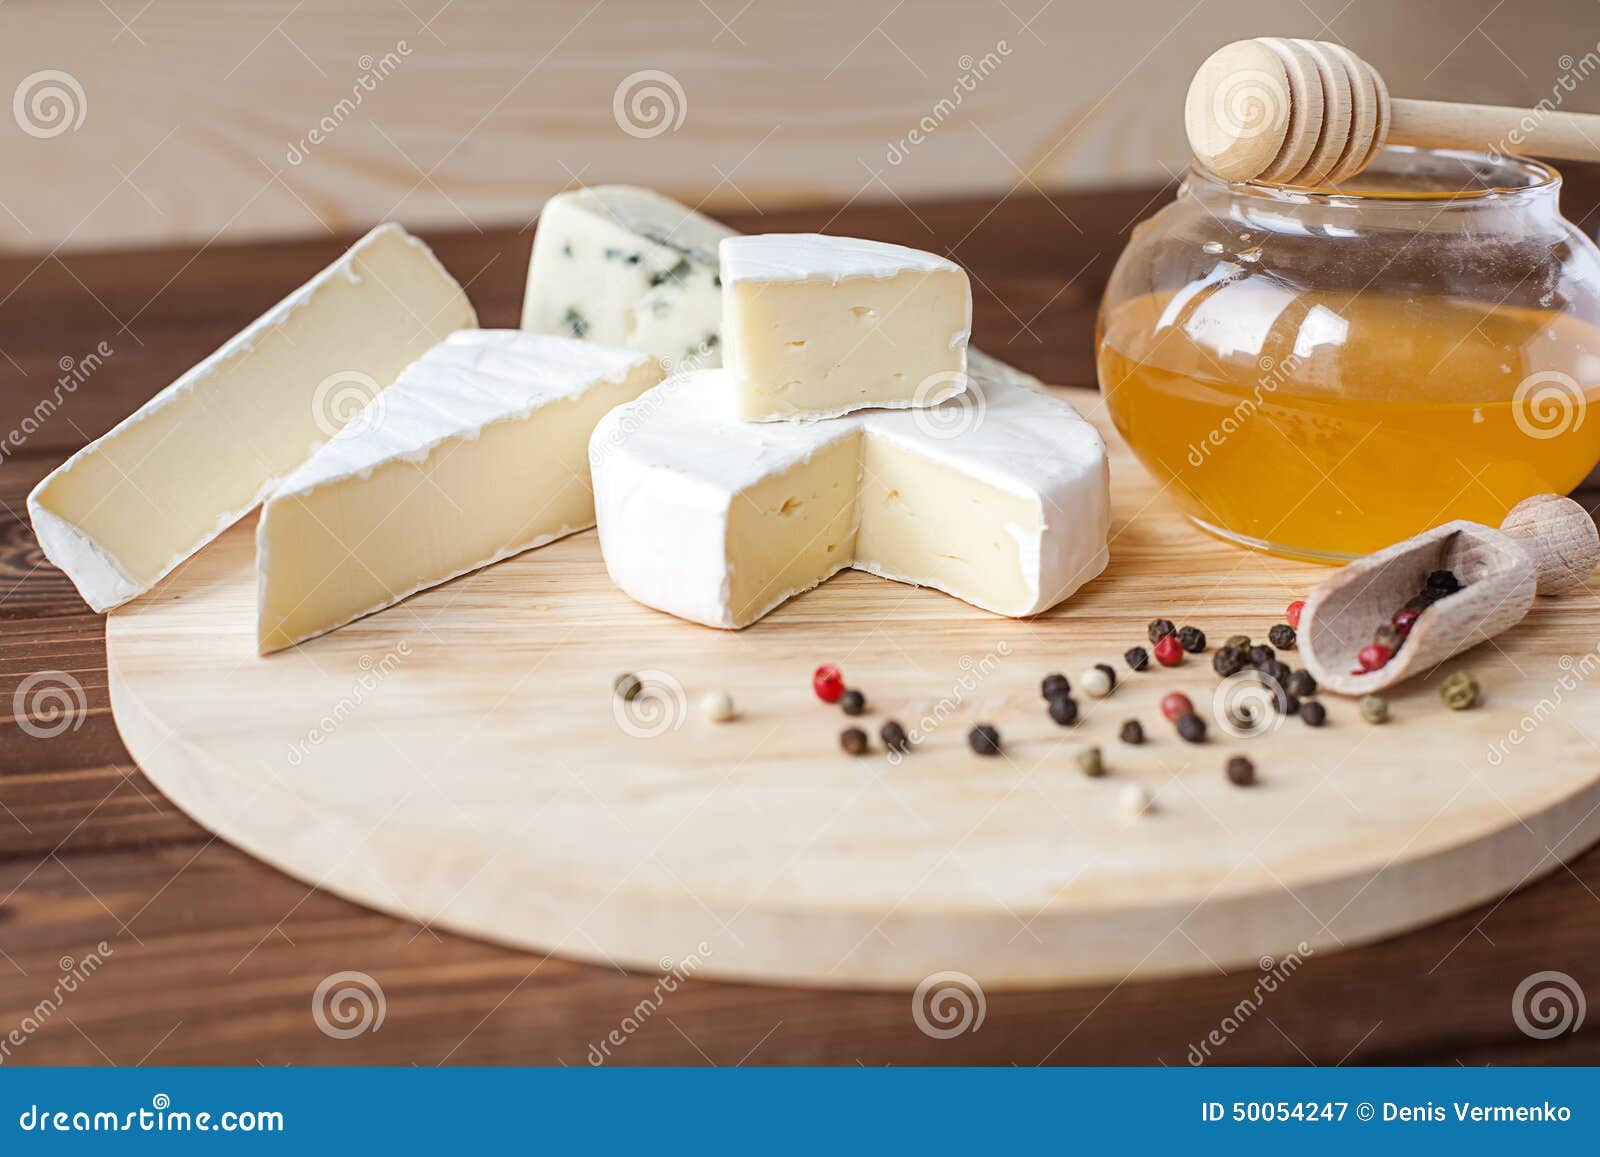 cheese plate with brie, camembert, roquefort